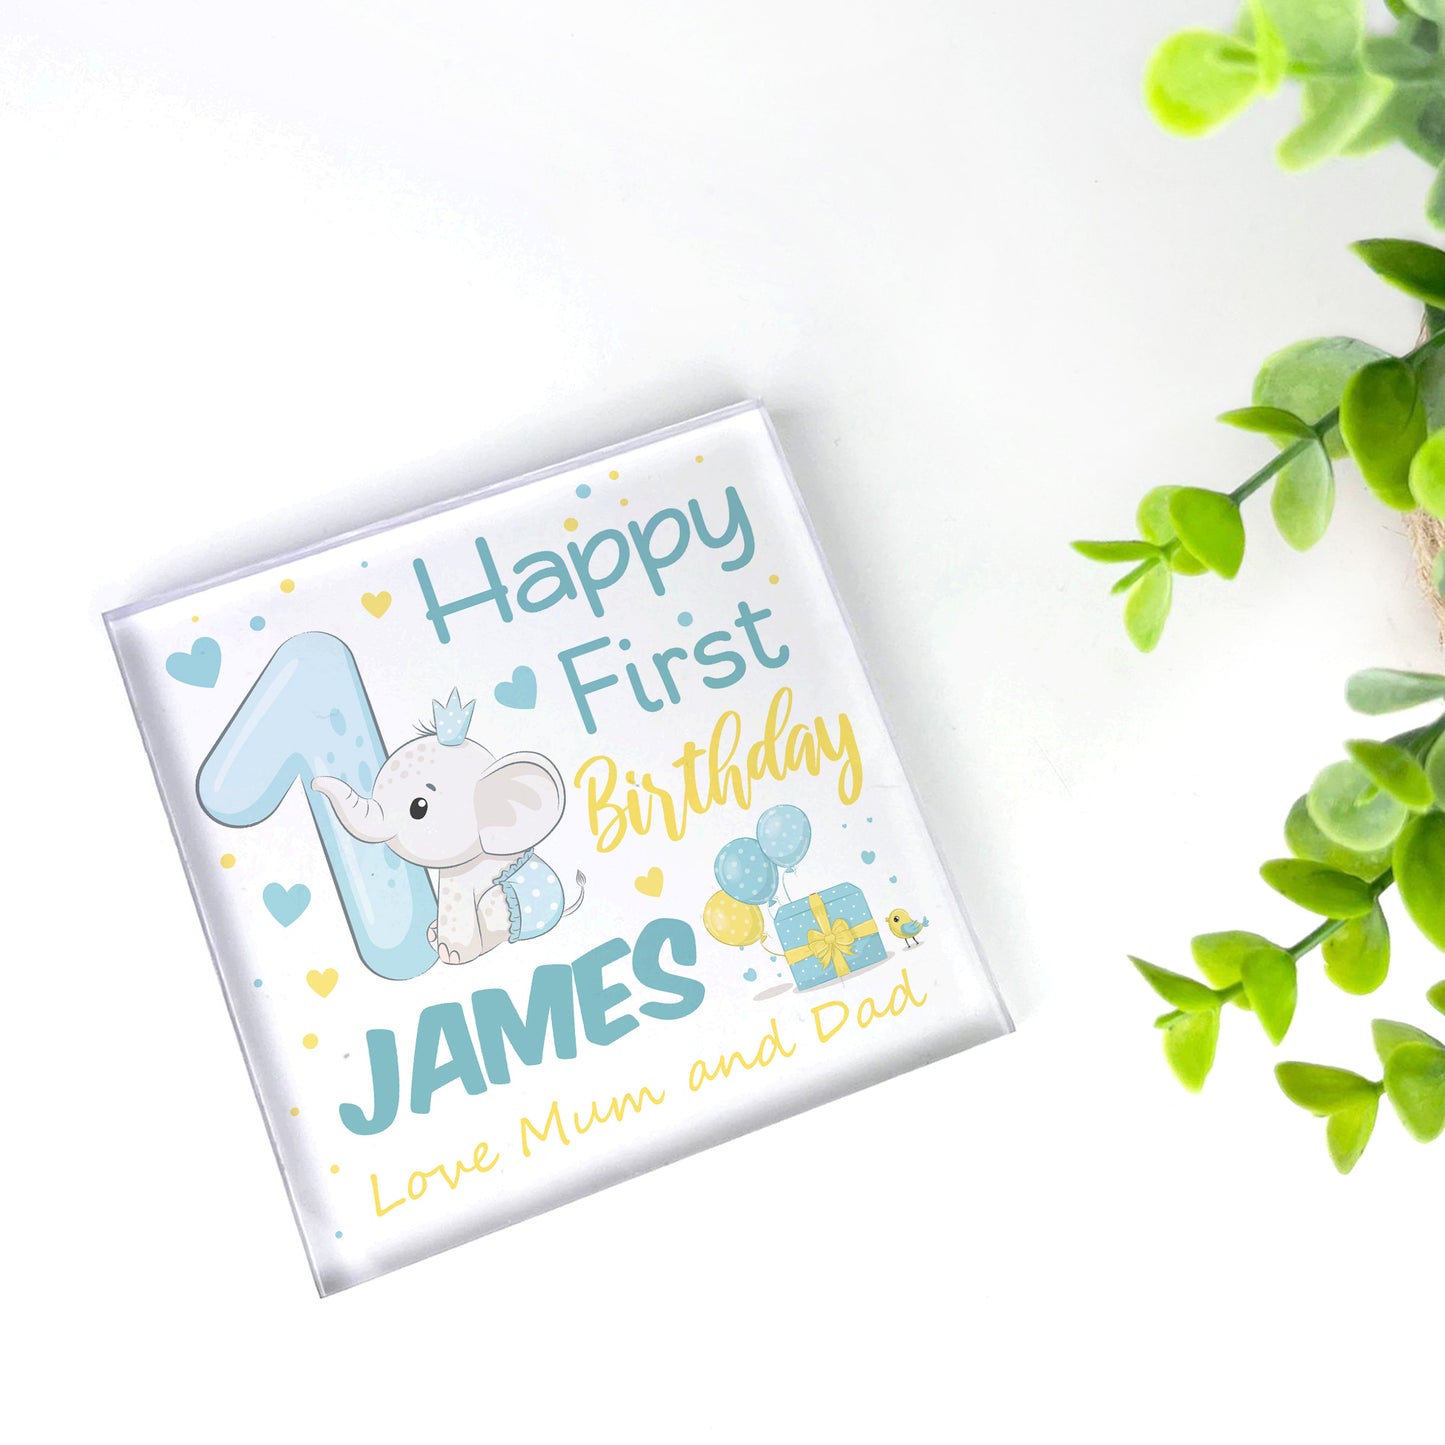 PERSONALISED 1st Birthday Gifts Baby Boy Son Grandson Gift